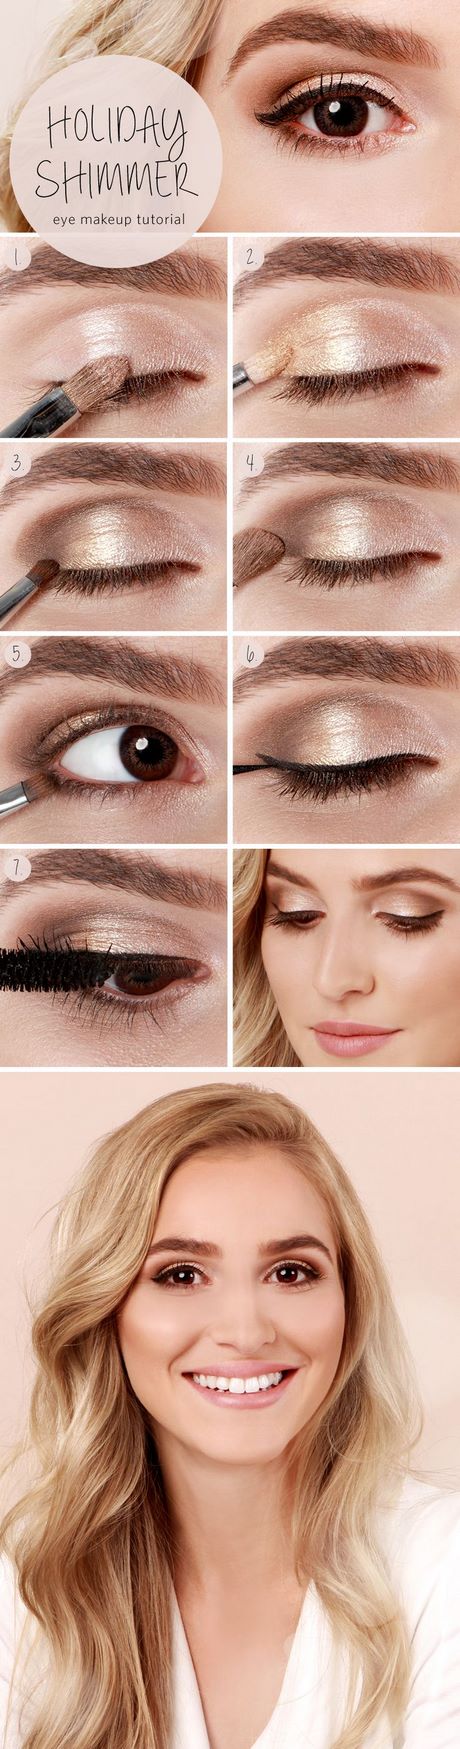 makeup-tutorial-for-beginners-with-brown-eyes-46_18 Make-up tutorial voor beginners met bruine ogen